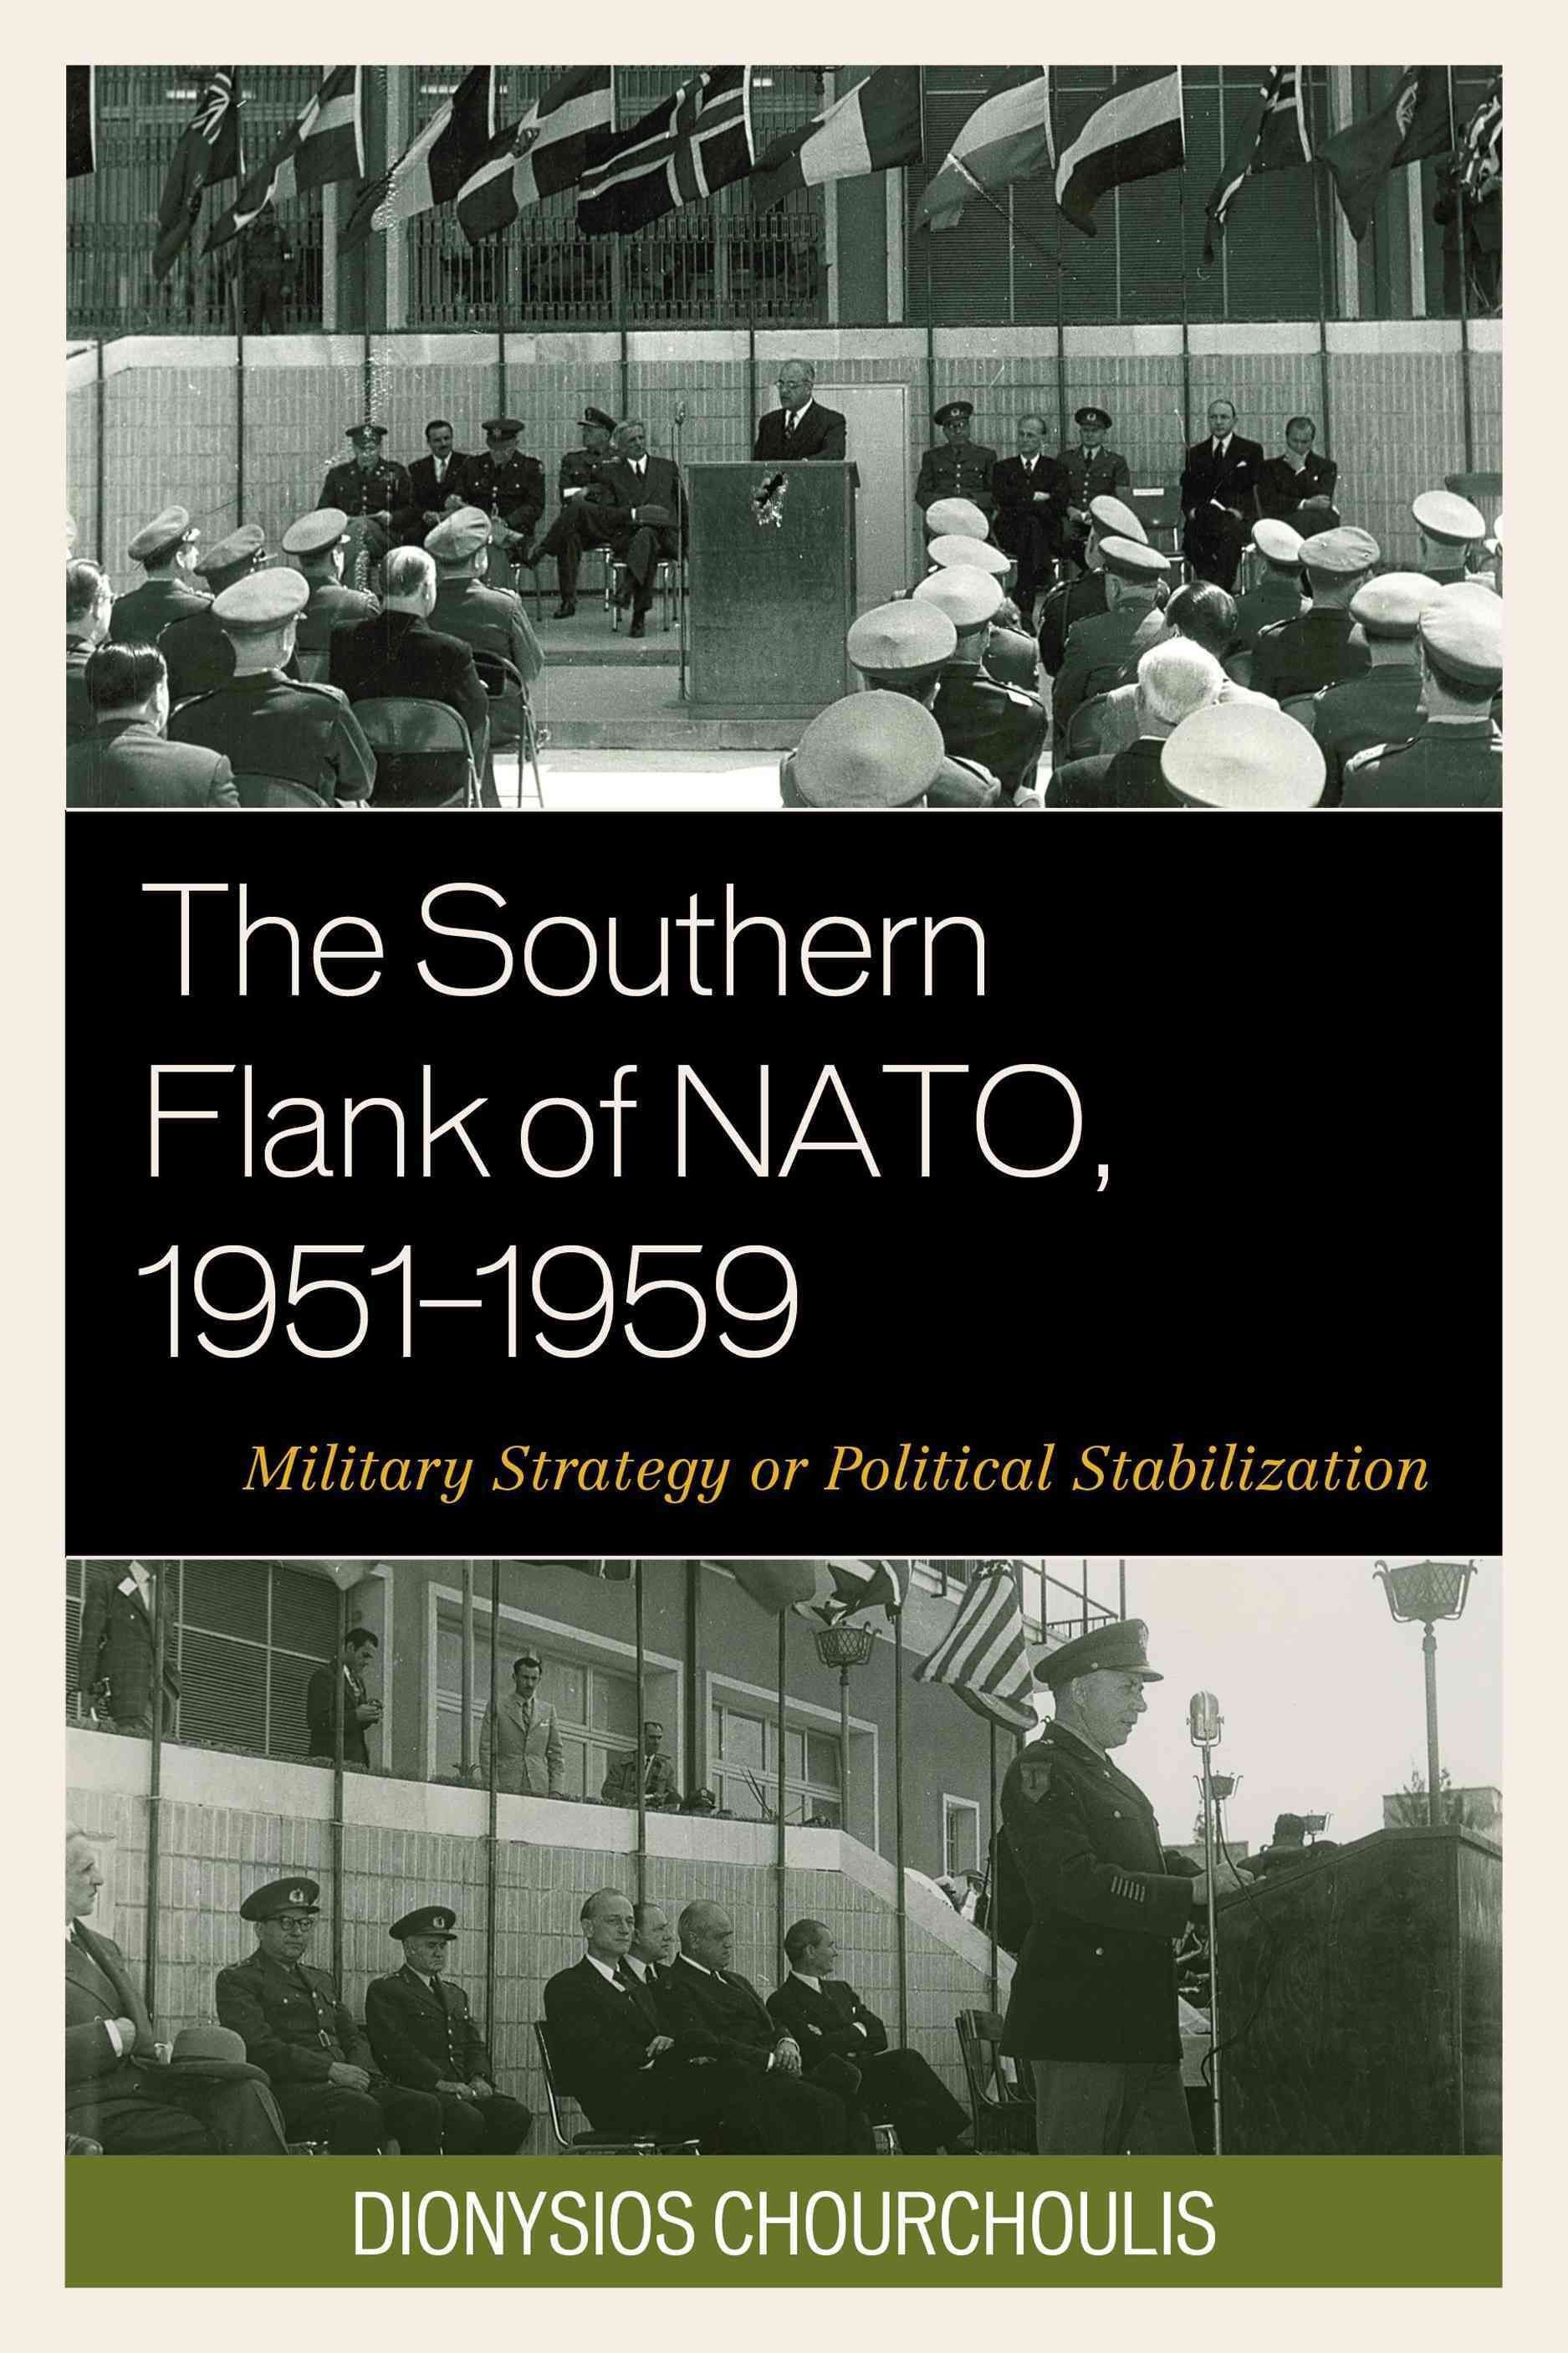 The Southern Flank of NATO, 1951-1959